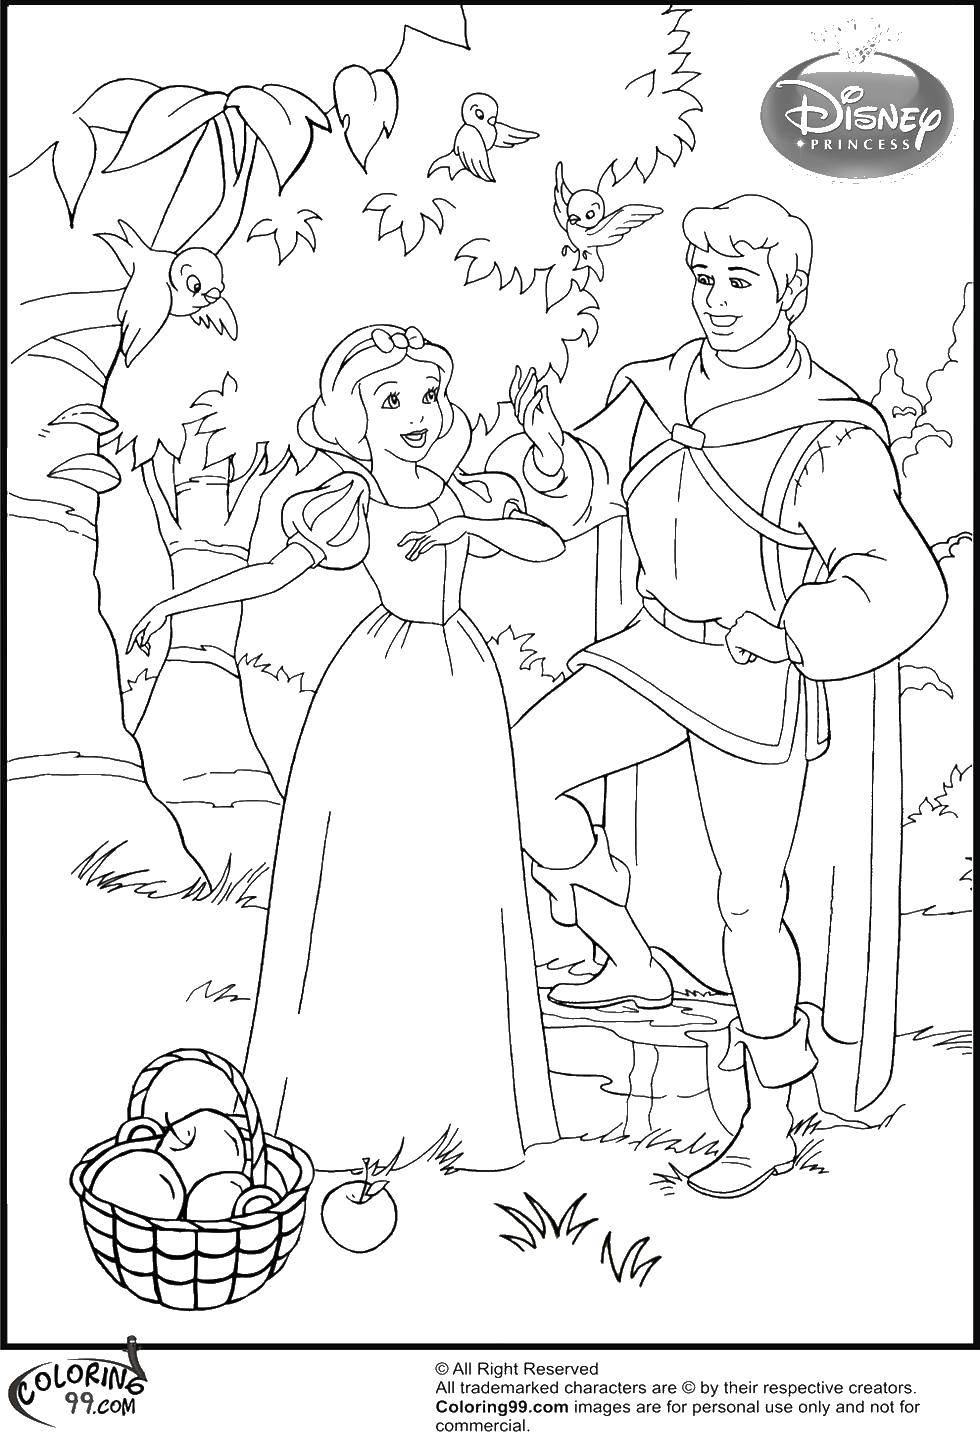 Coloring The Prince and snow white. Category snow white. Tags:  princesses, cartoons, fairy tales, Snow white, the Prince.